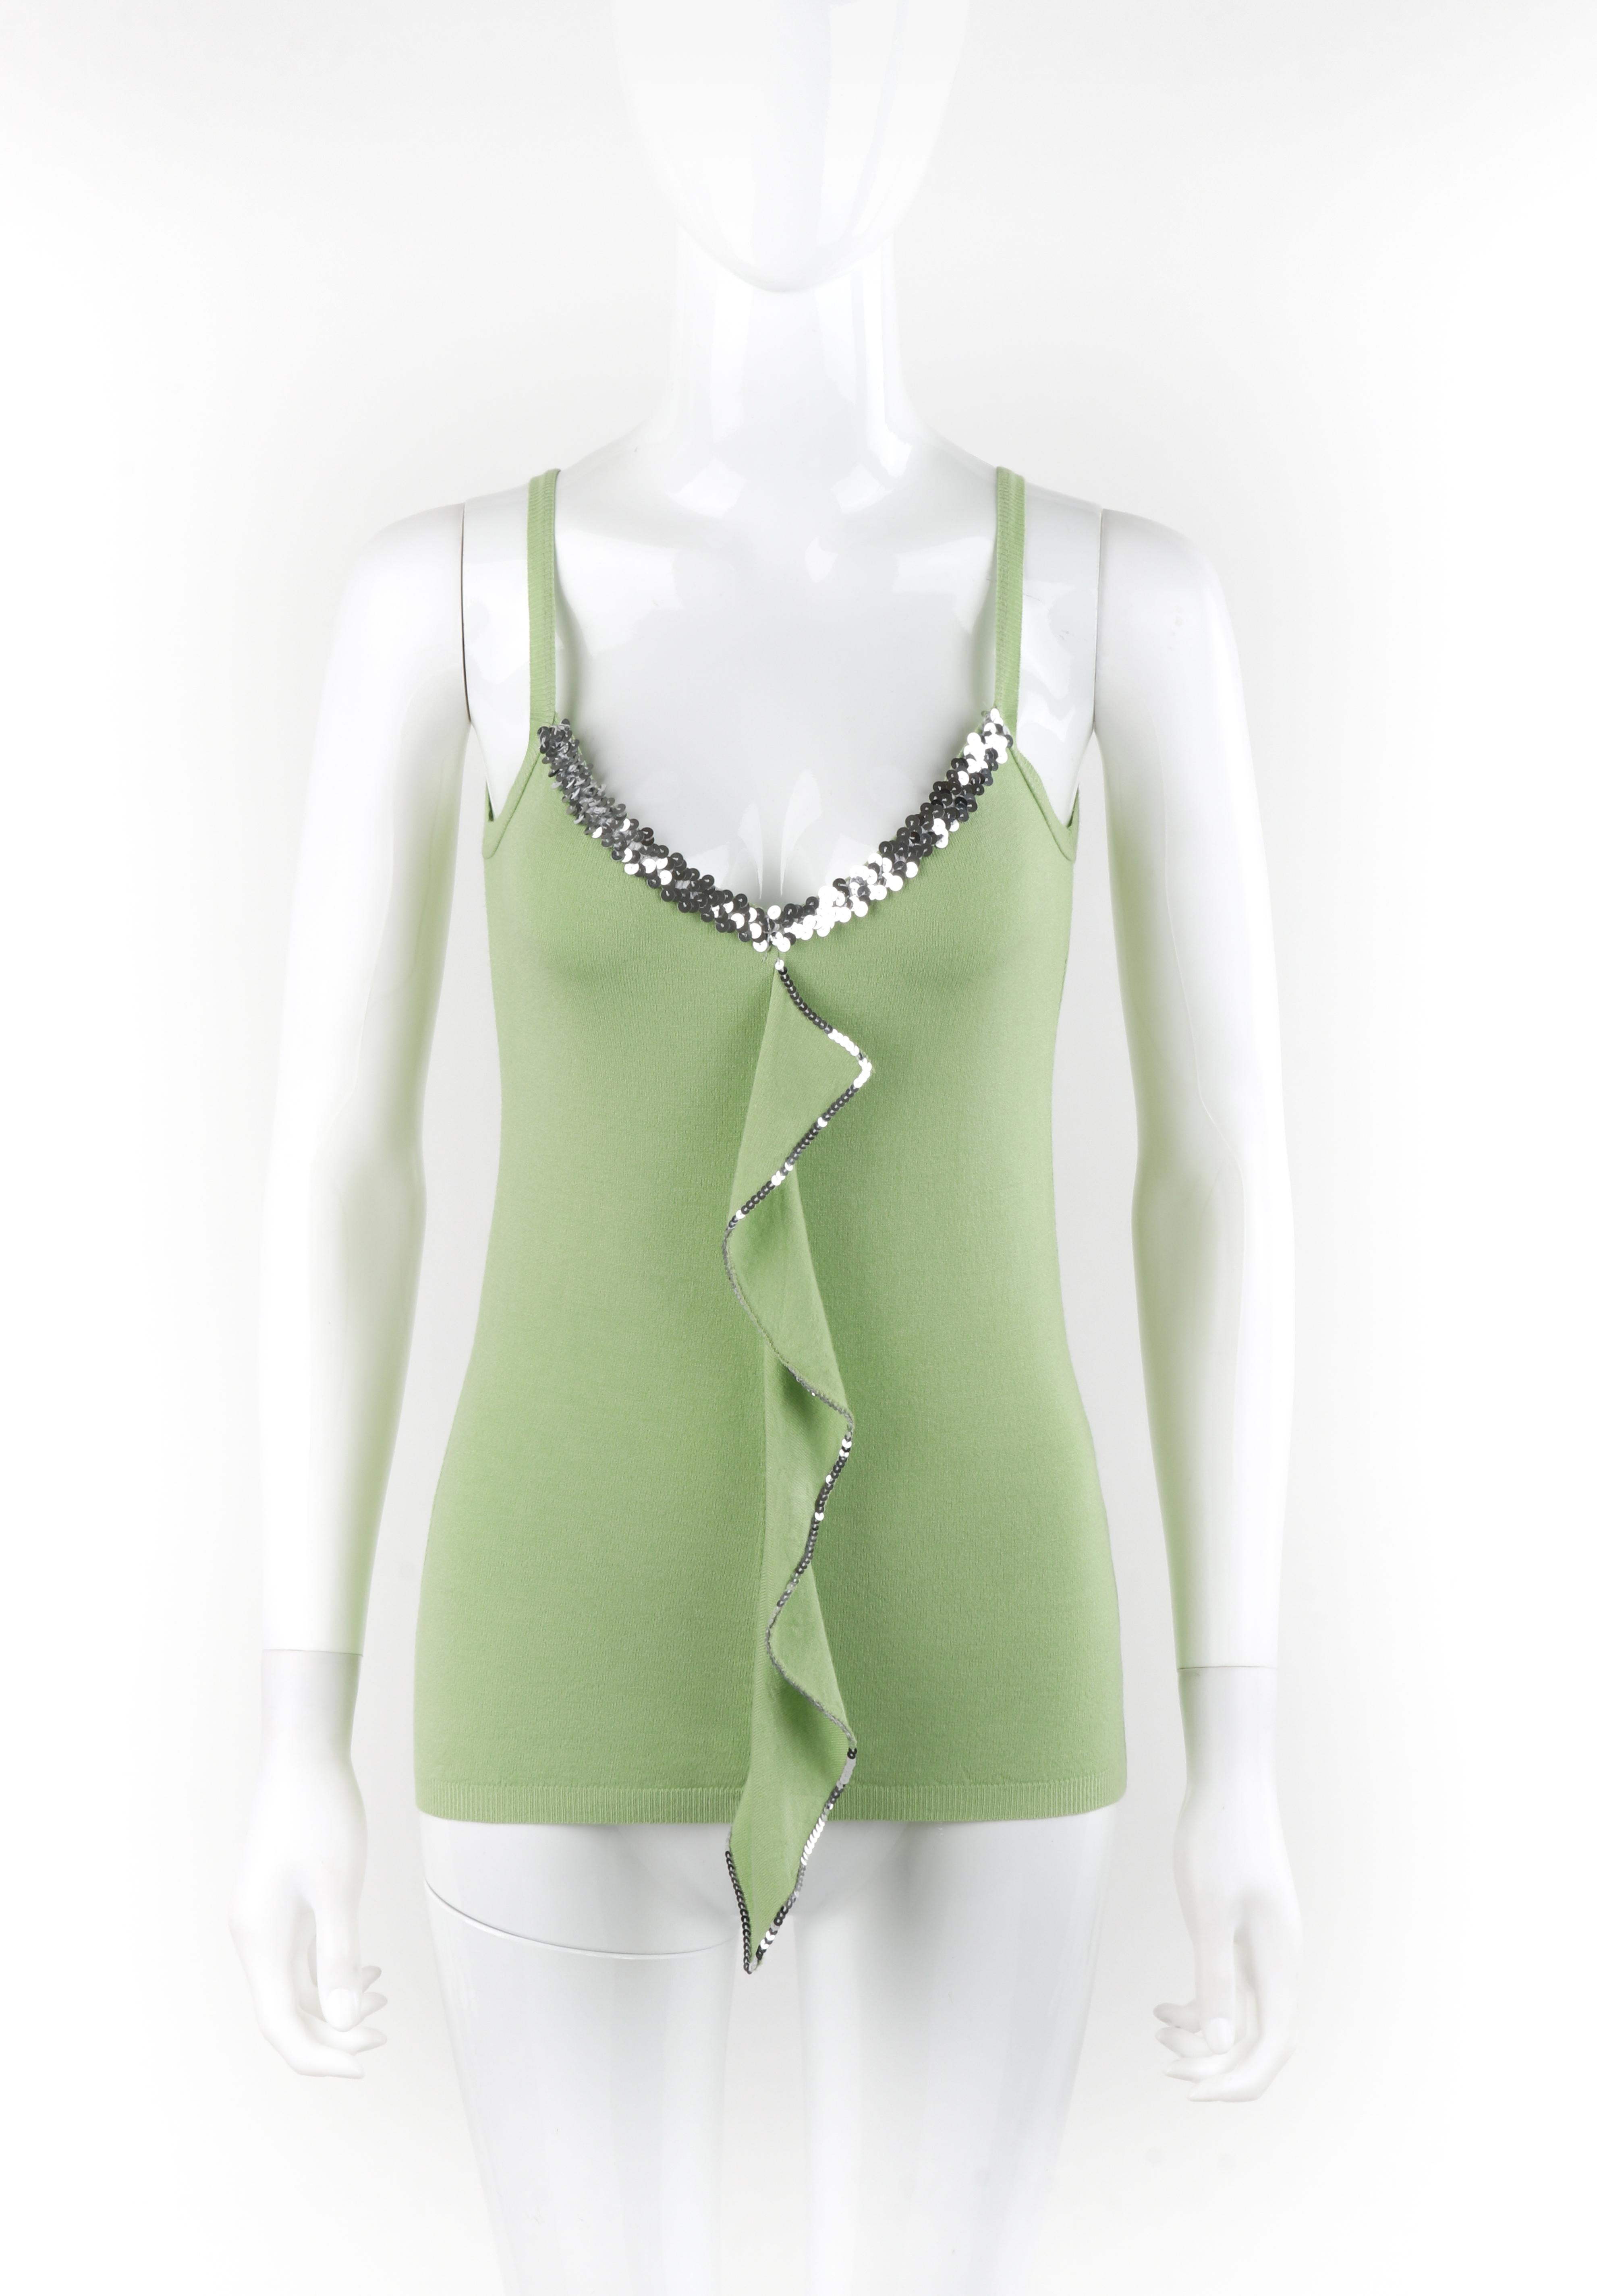 Brand / Manufacturer: Alexander McQueen
Circa: 1990s
Designer: Alexander McQueen
Style: Tank Top
Color(s): Shades of green, silver
Lined: No
Unmarked Fabric Content (feel of): Stretch knit (primary fabric), sequin (embellishment)
Additional Details